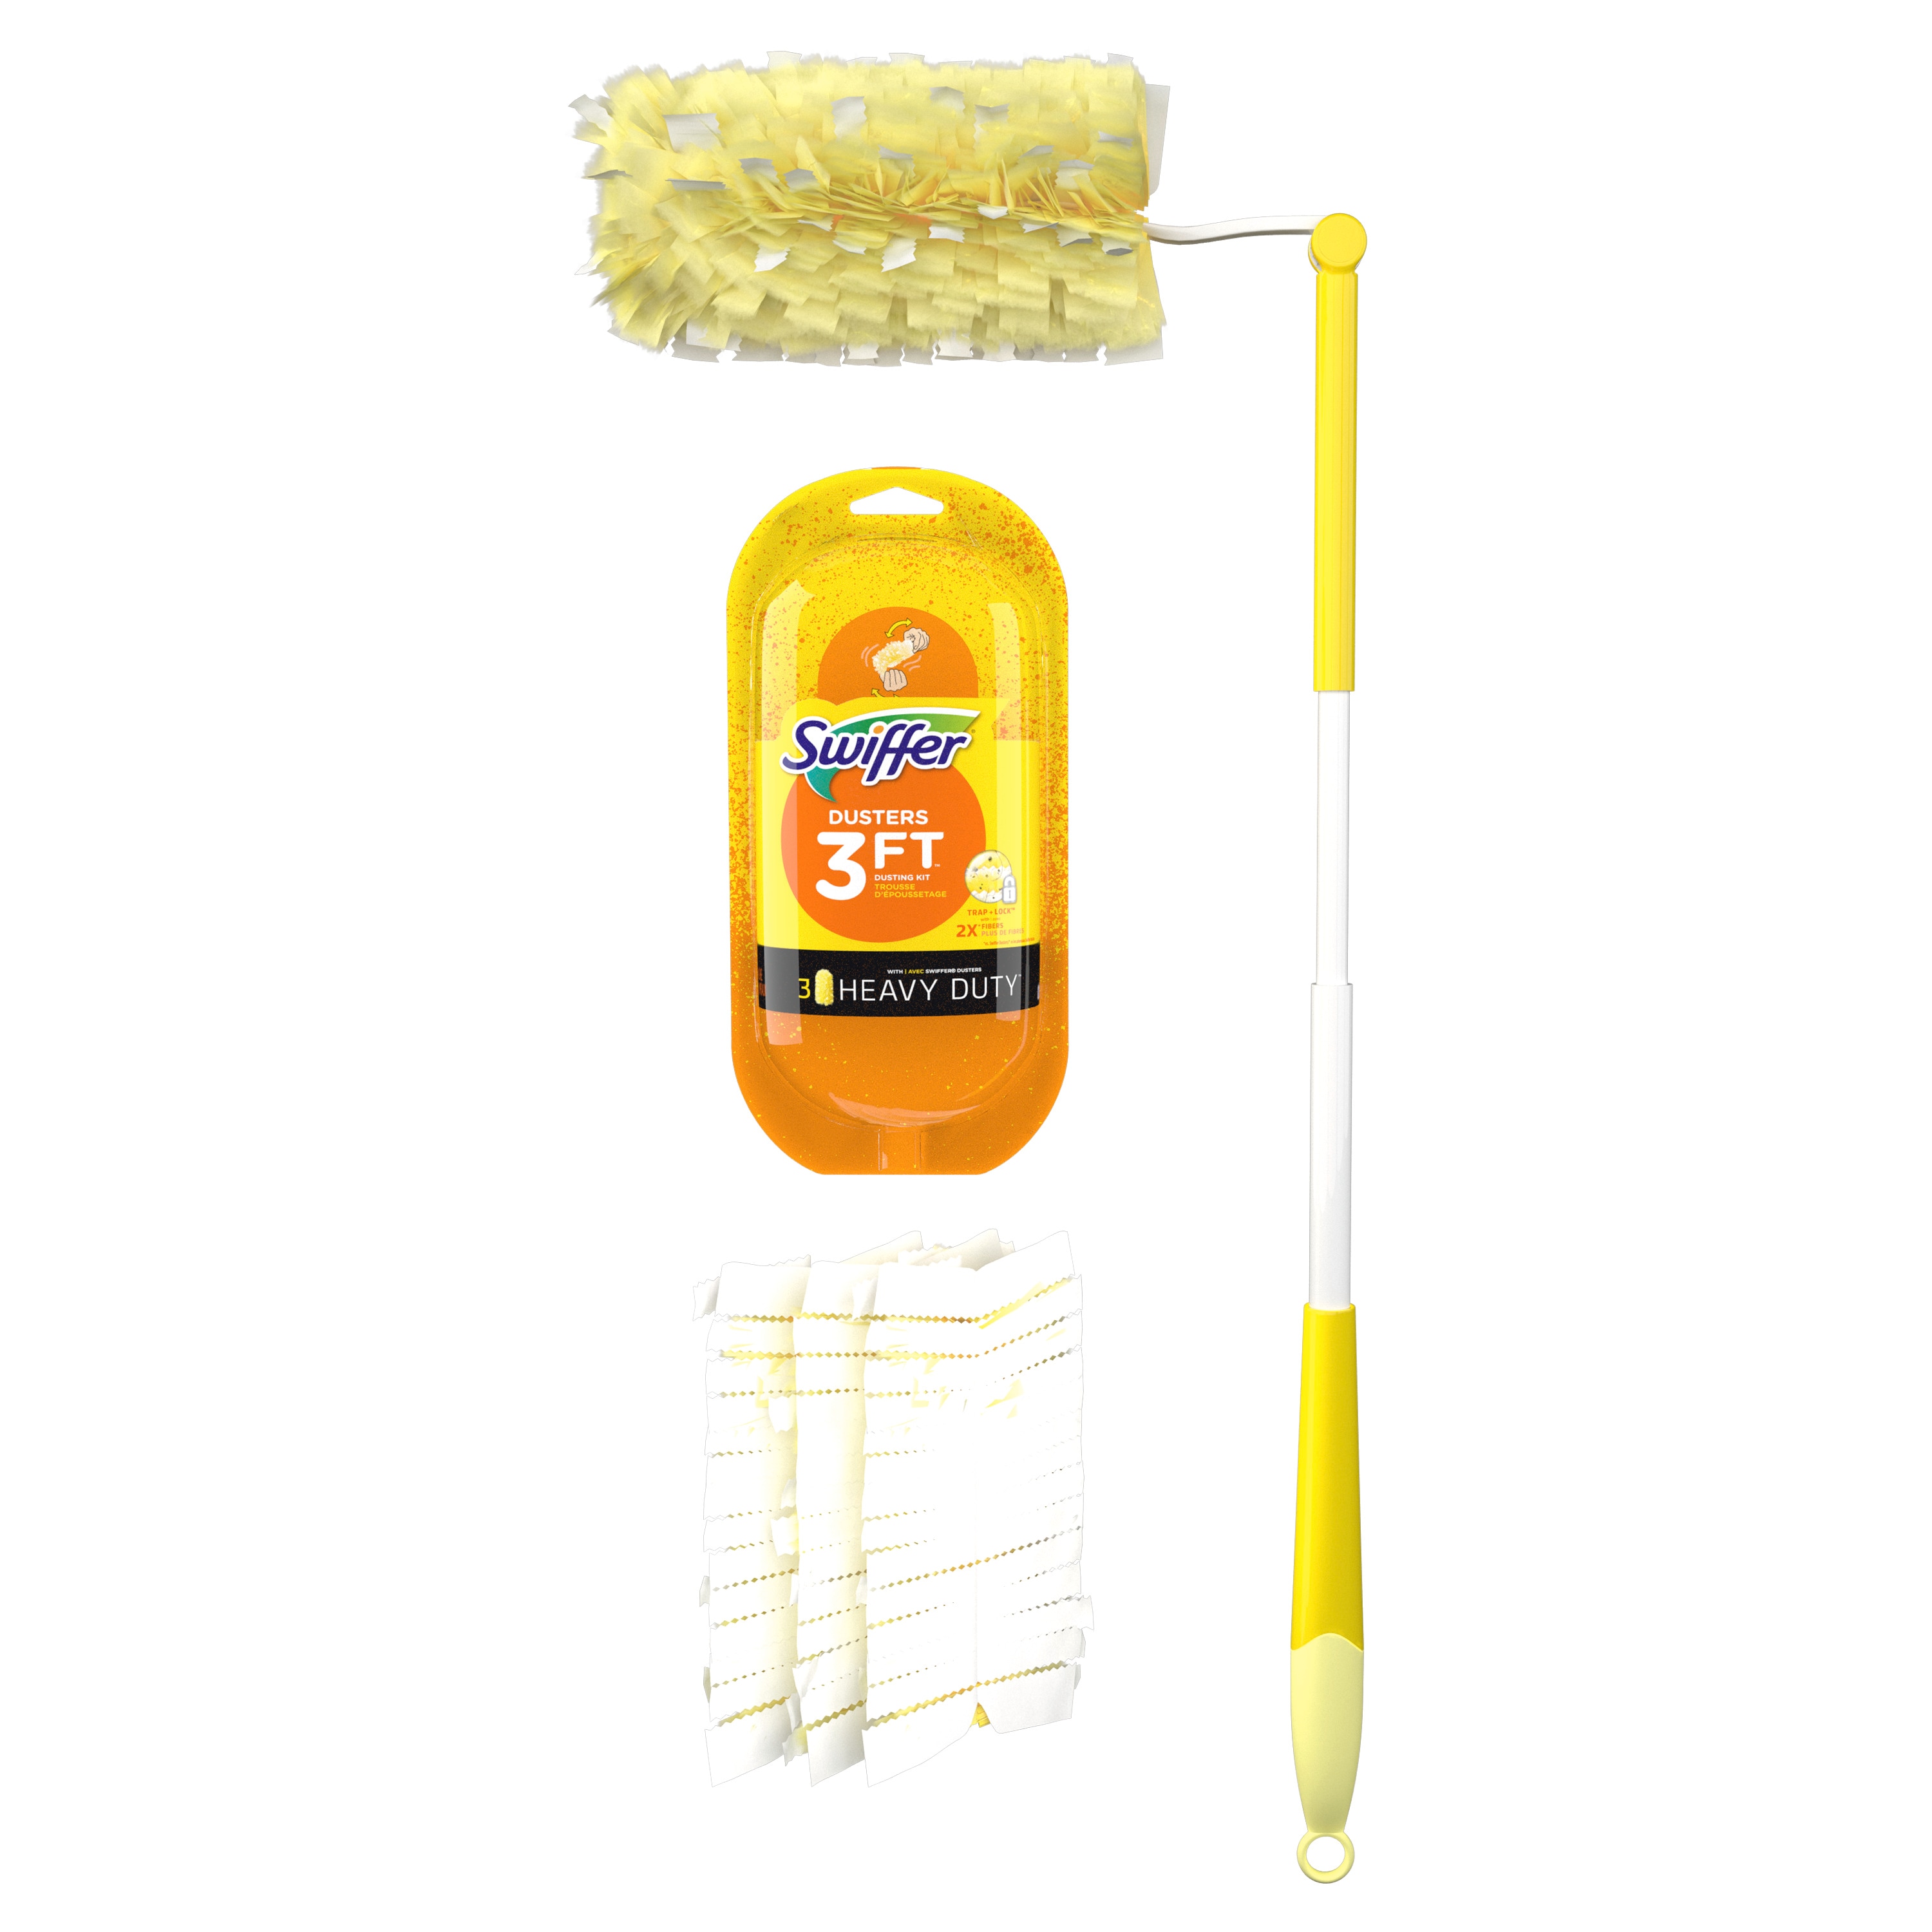 Swiffer Poly Fiber Extendable Dusting Wand in the Dusters